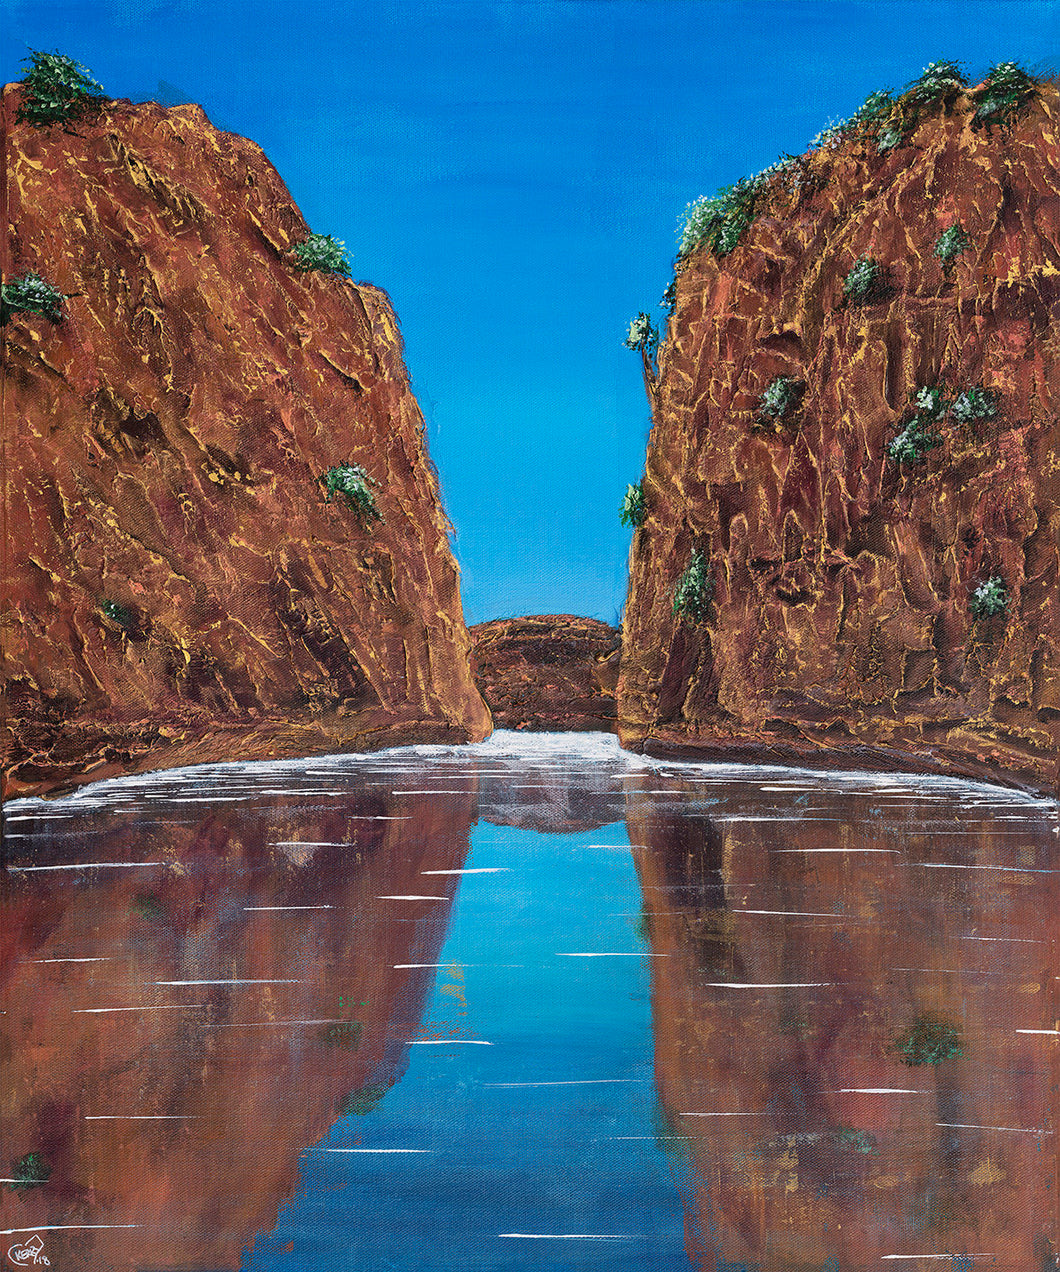 Original painting of Horizontal Falls in the North West of Western Australia and it's reflection in the water